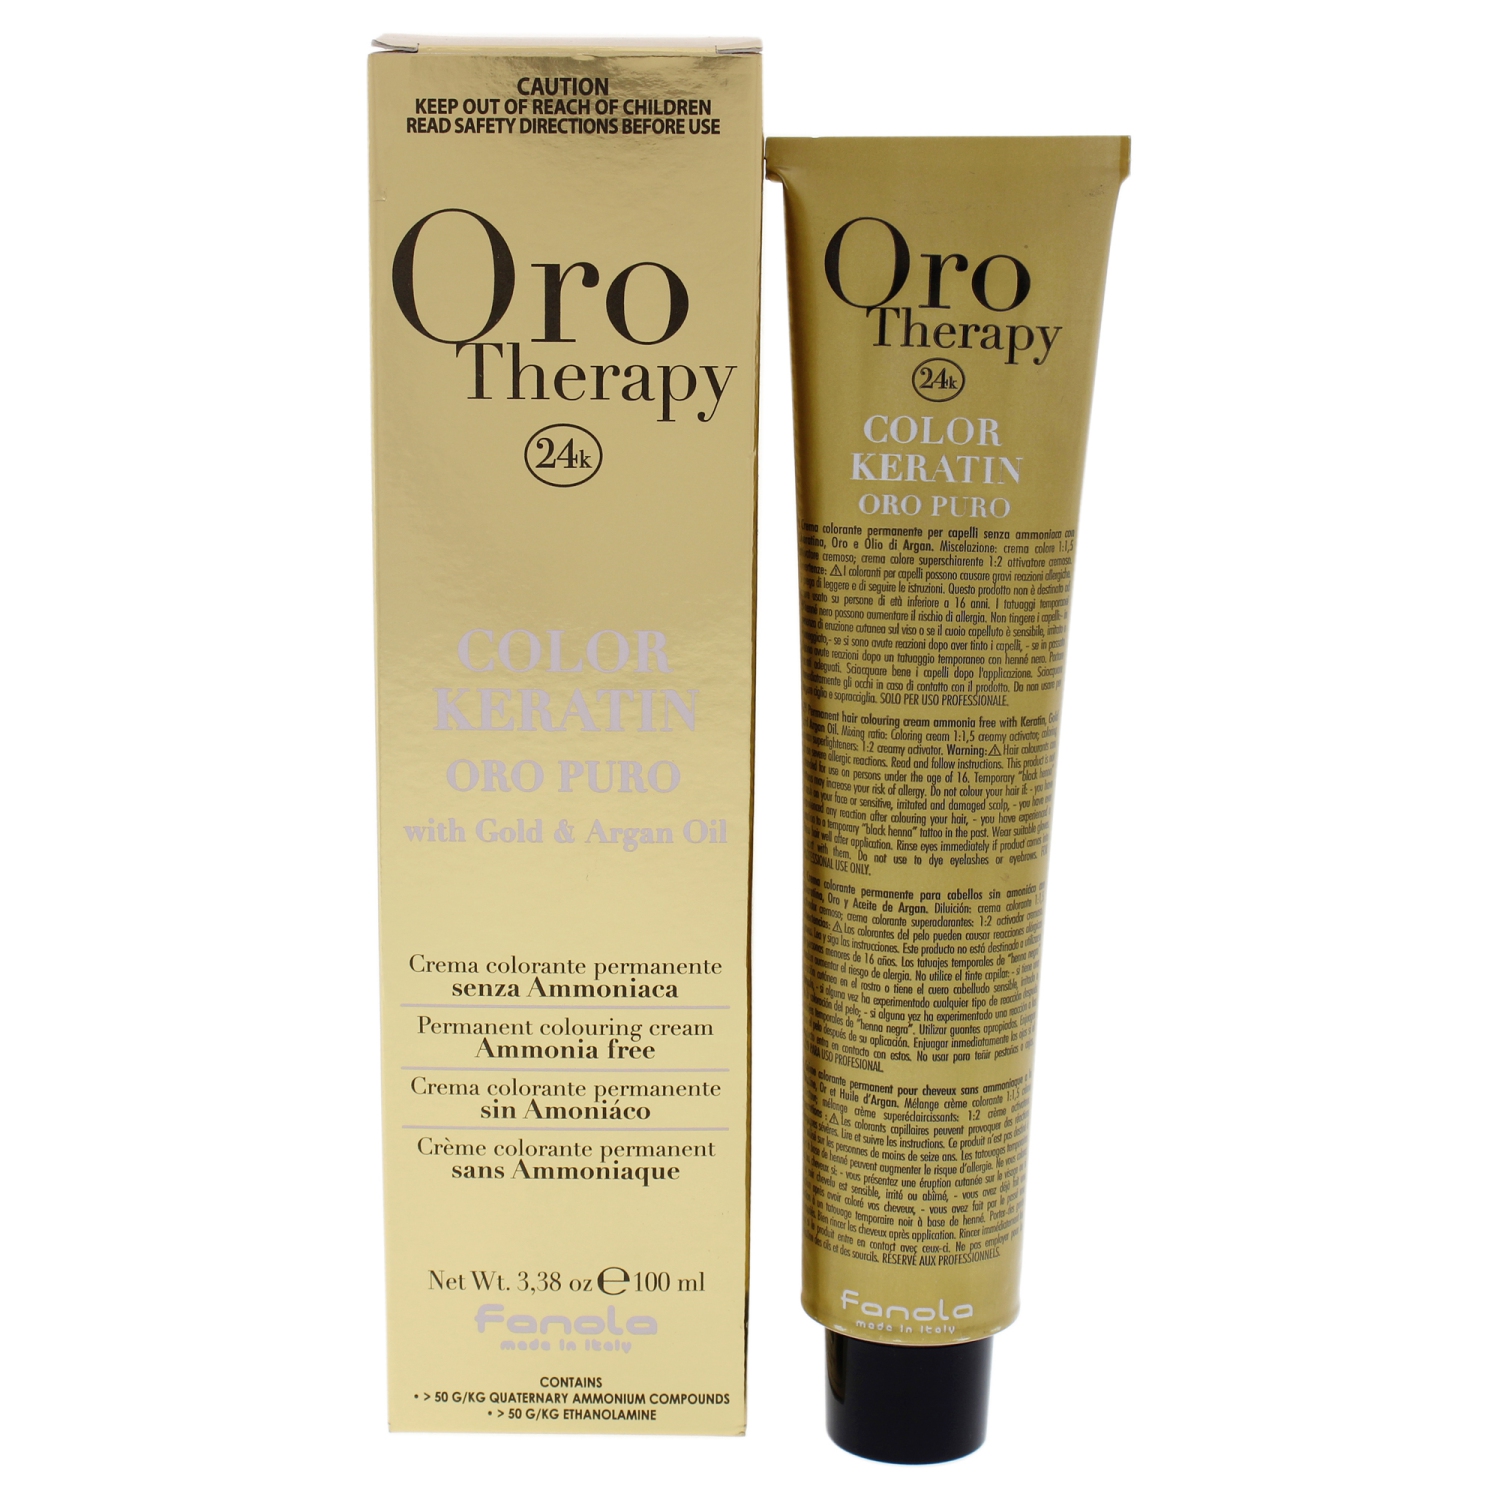 Oro Therapy Color Keratin - 6-5 Dark Blonde Mahogany by Fanola for Unisex - 3.38 oz Hair Color